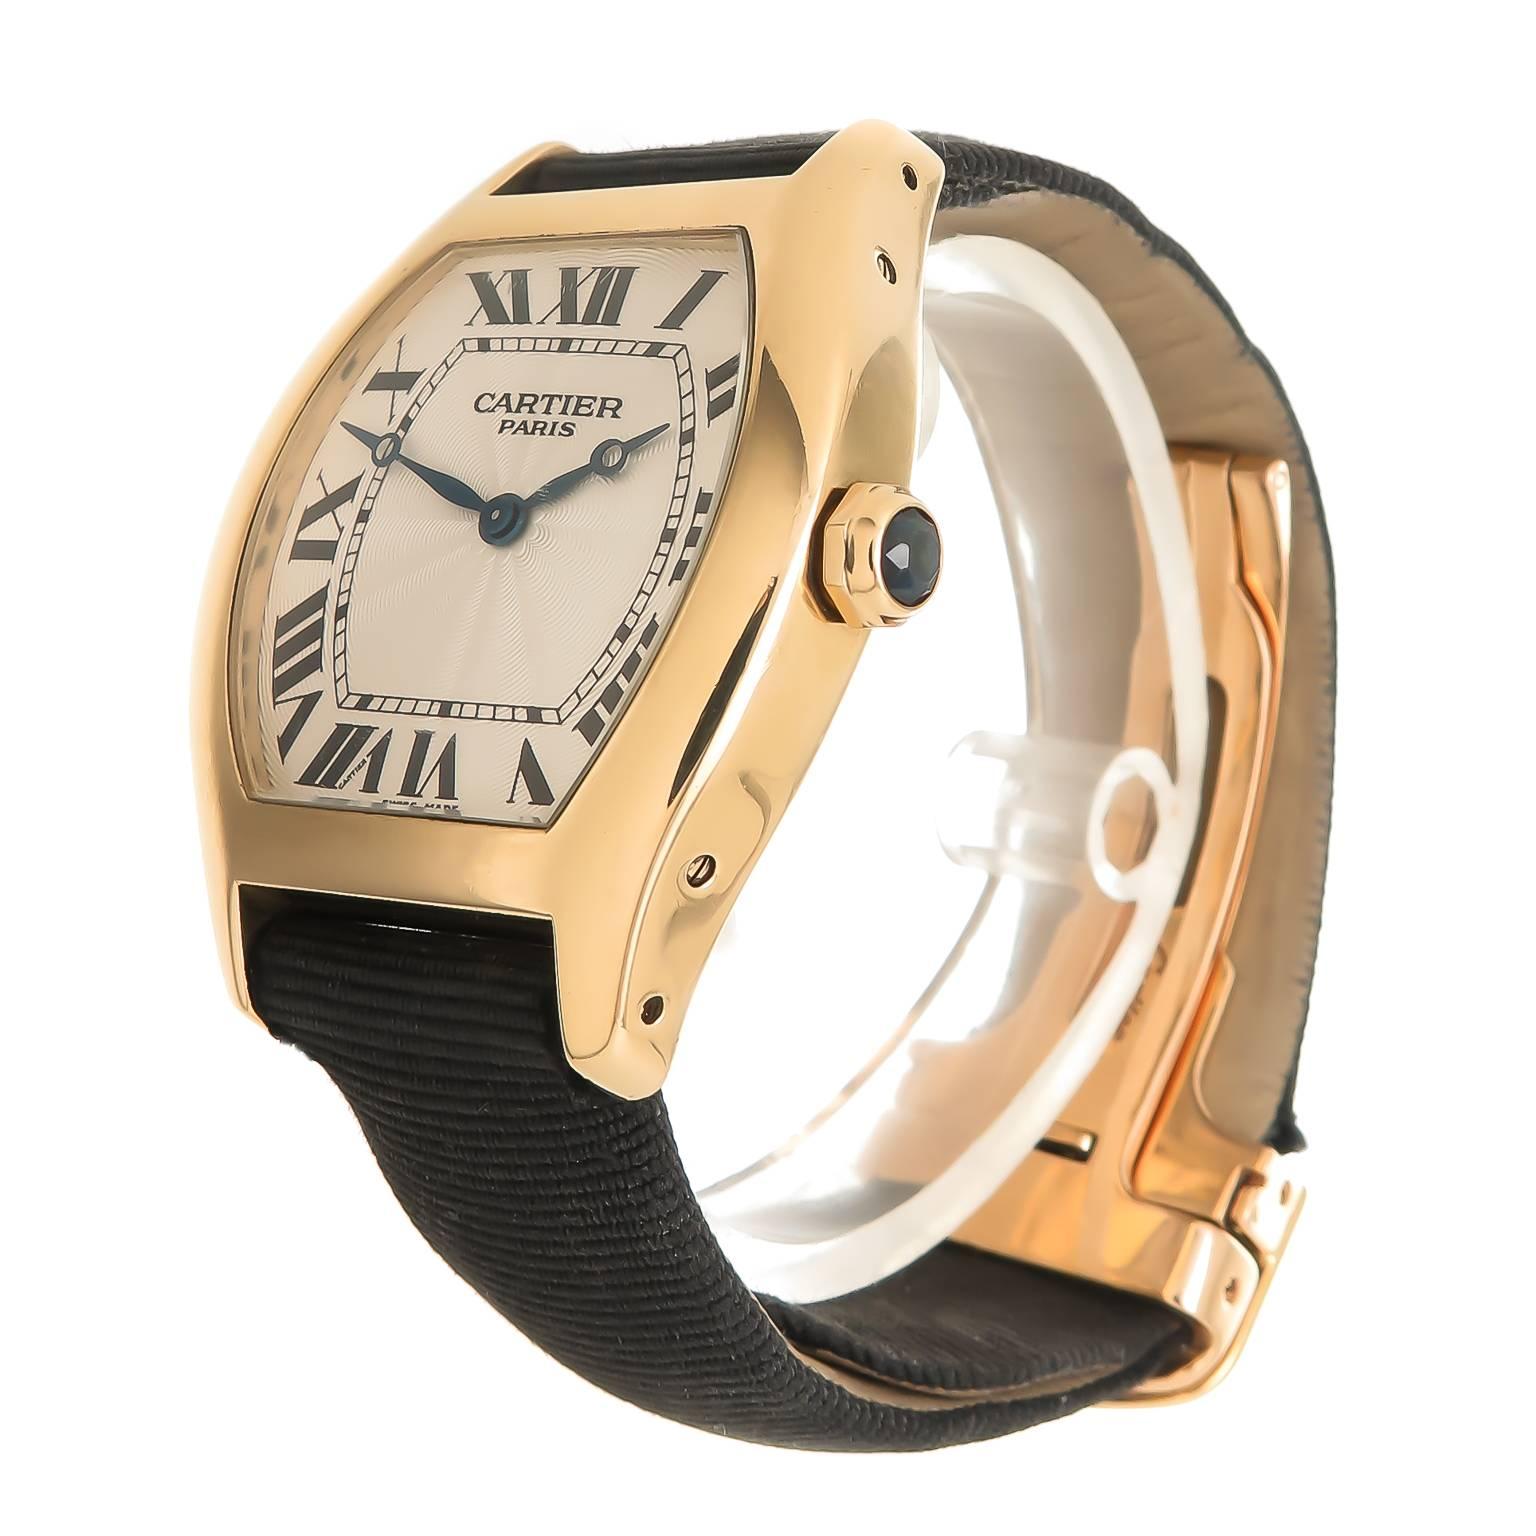 Circa 2012 Cartier Large Tortue Reference 2496C Wrist Watch, 18K Yellow Gold Water Resistant case measuring 44.9 MM X 36 MM X 9.4 MM thick. Caliber 430 Manual wind movement, Engine turned Silvered dial with Black Roman Numerals, scratch resistant